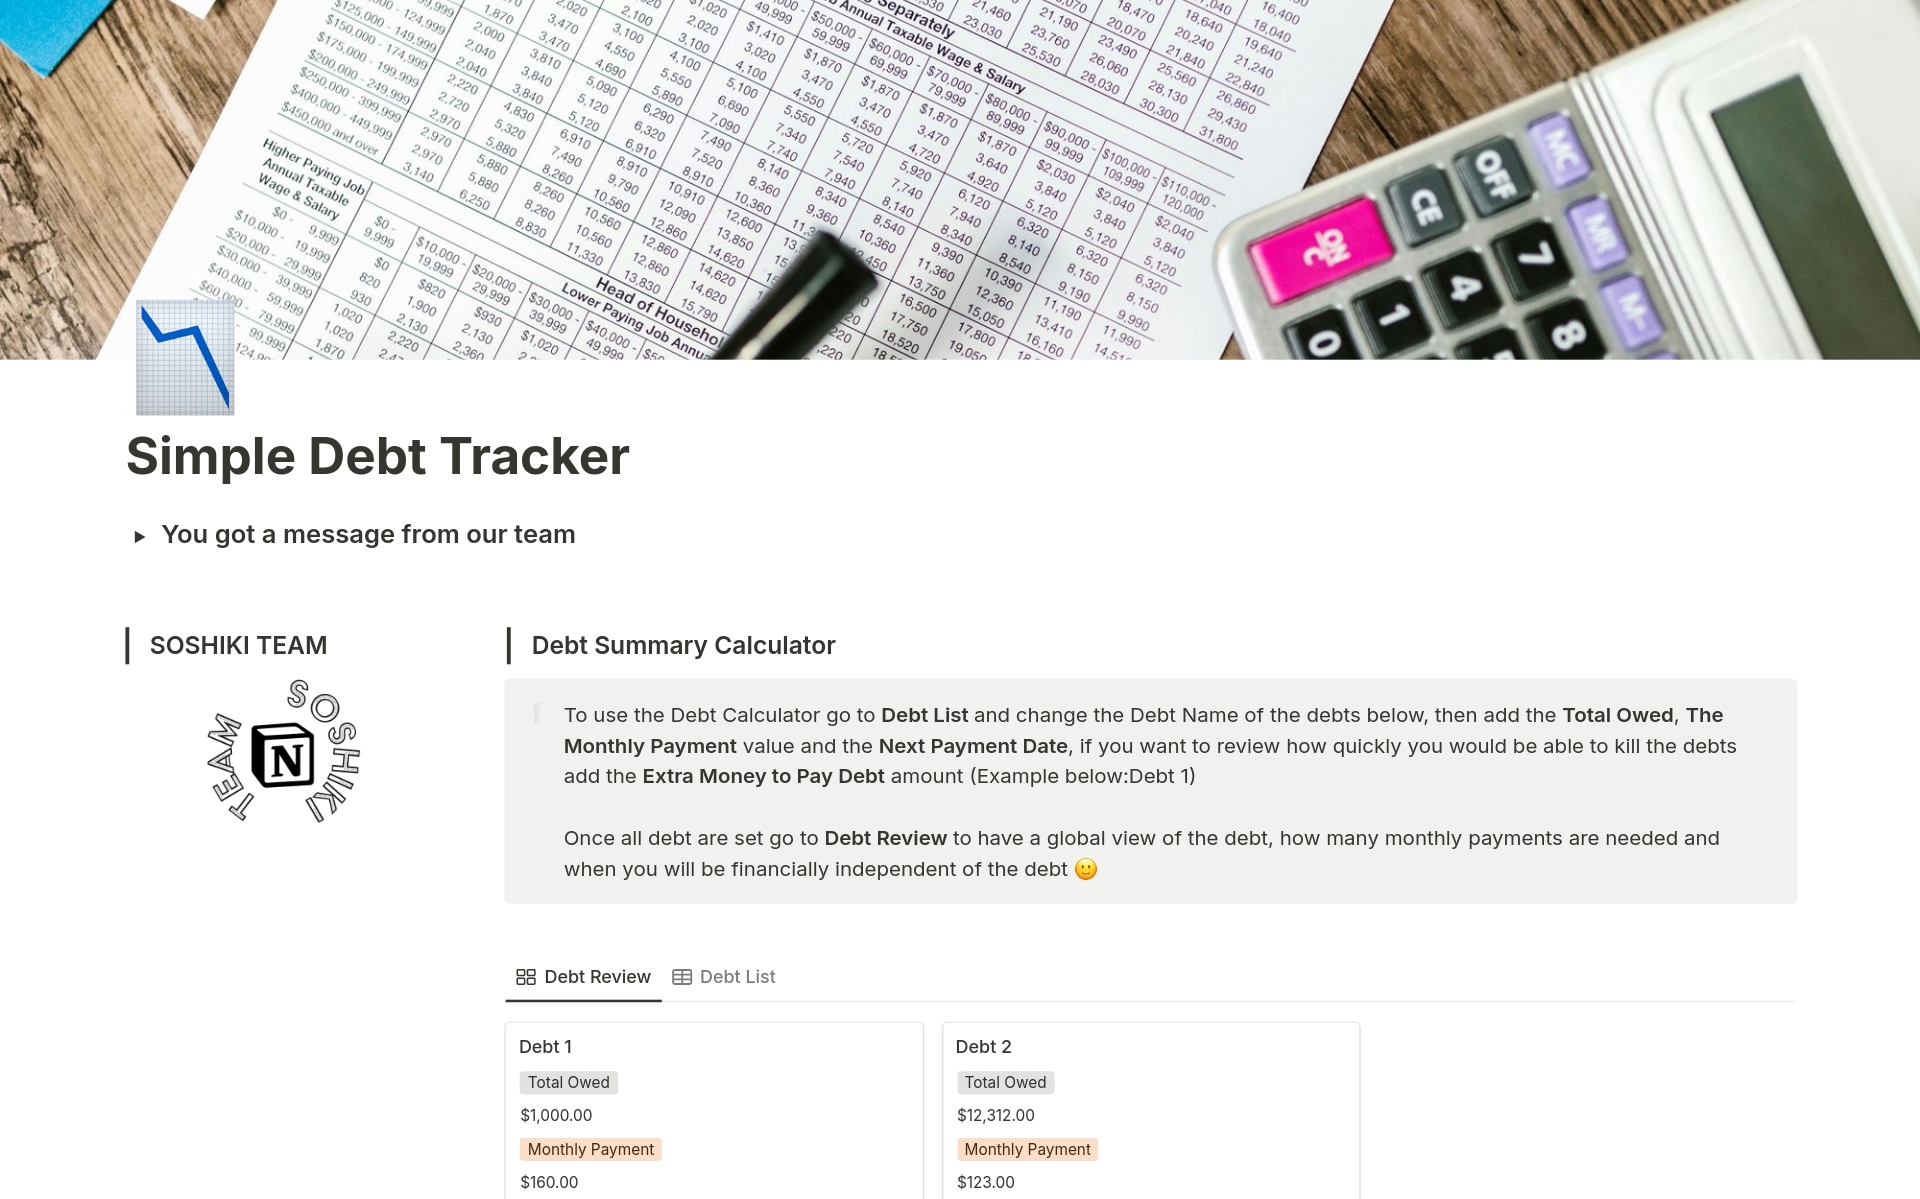 We have created a 10 debt list tracker that will allow you to perform the following tasks:
- Calculate when you will debt free and how many monthly payments are needed;
- Track payments done in Snowball Effect or Higher Debts First Systems;